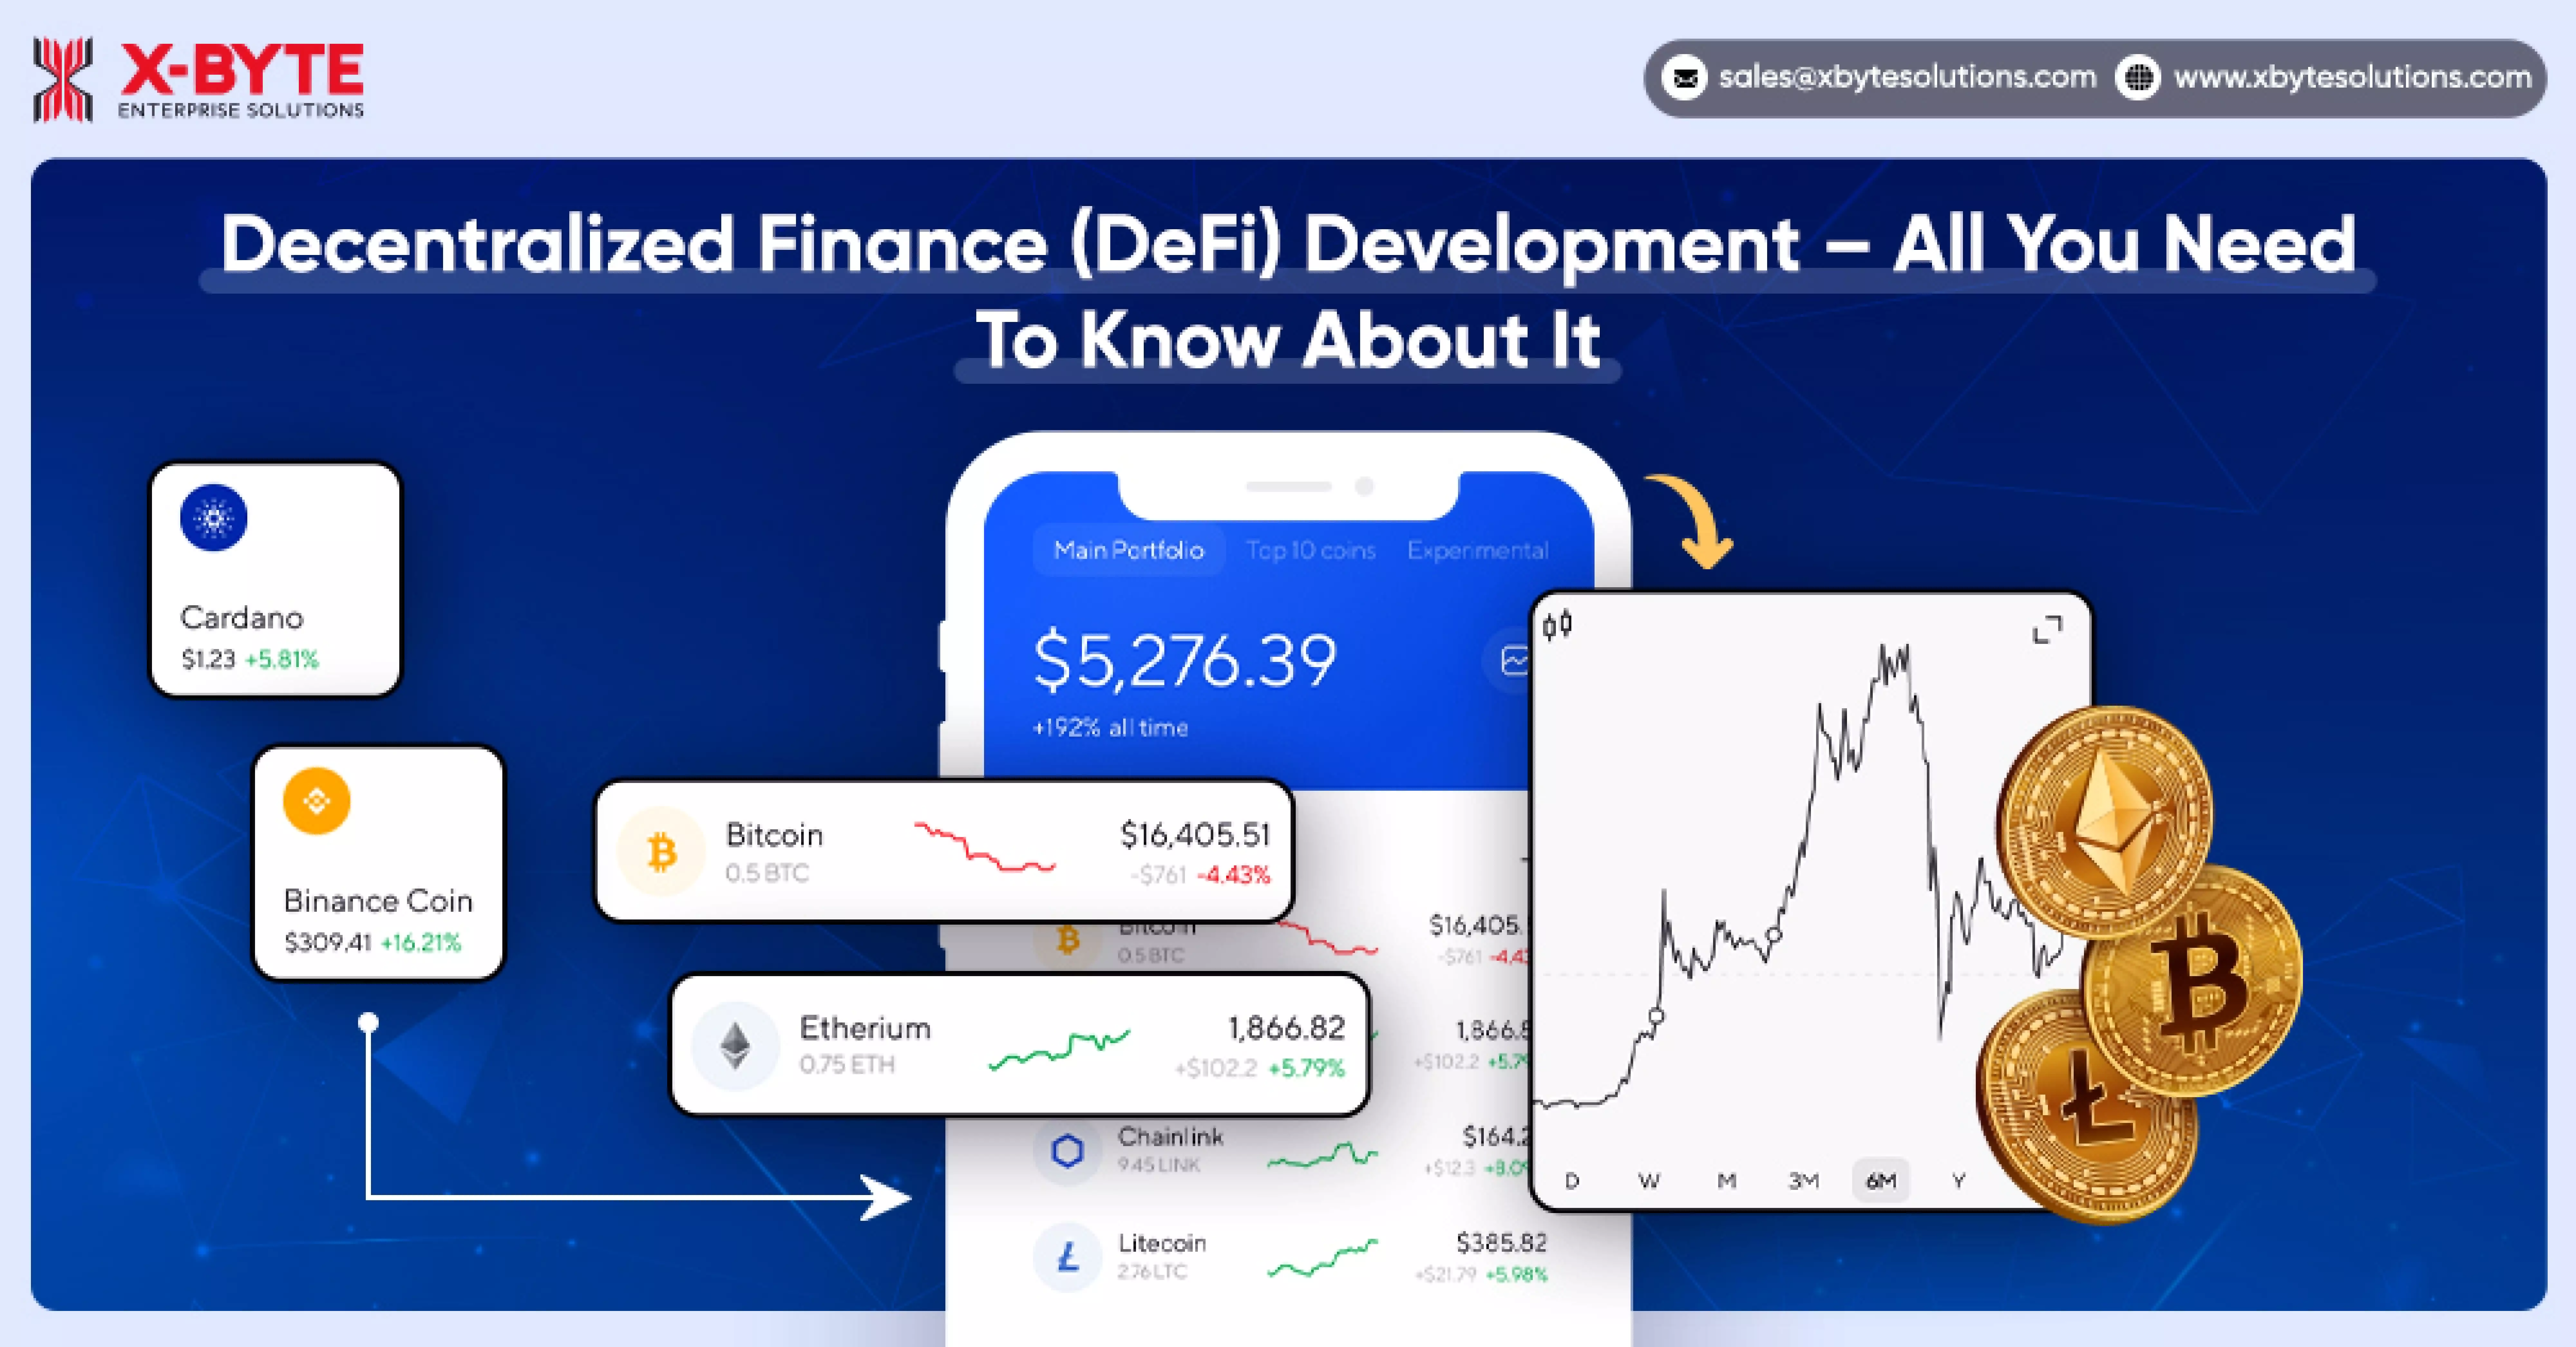 Decentralized Finance (DeFi) Development – All You Need To Know About It